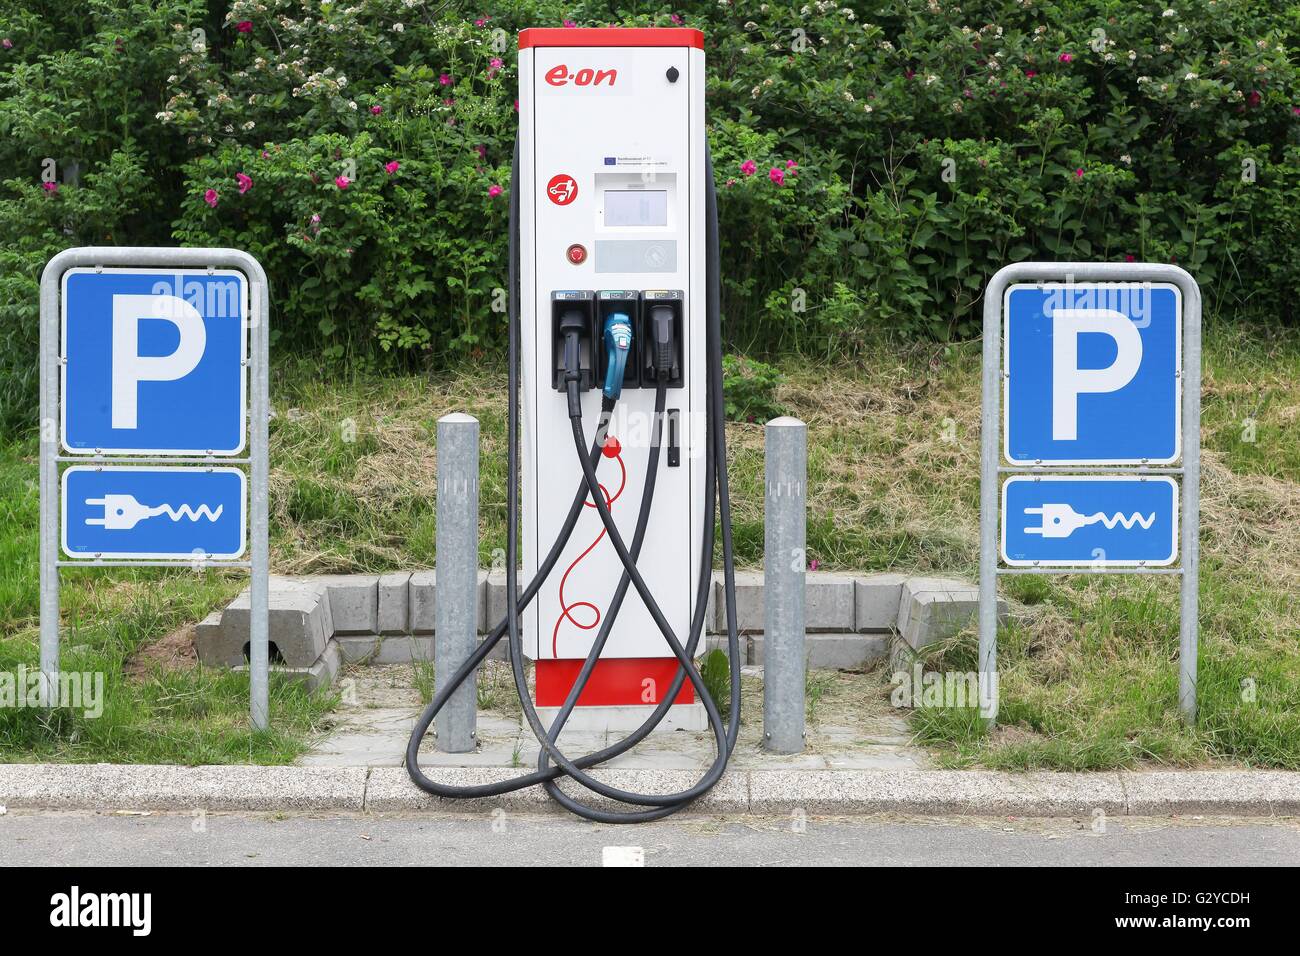 Eon charging point for electric cars Stock Photo